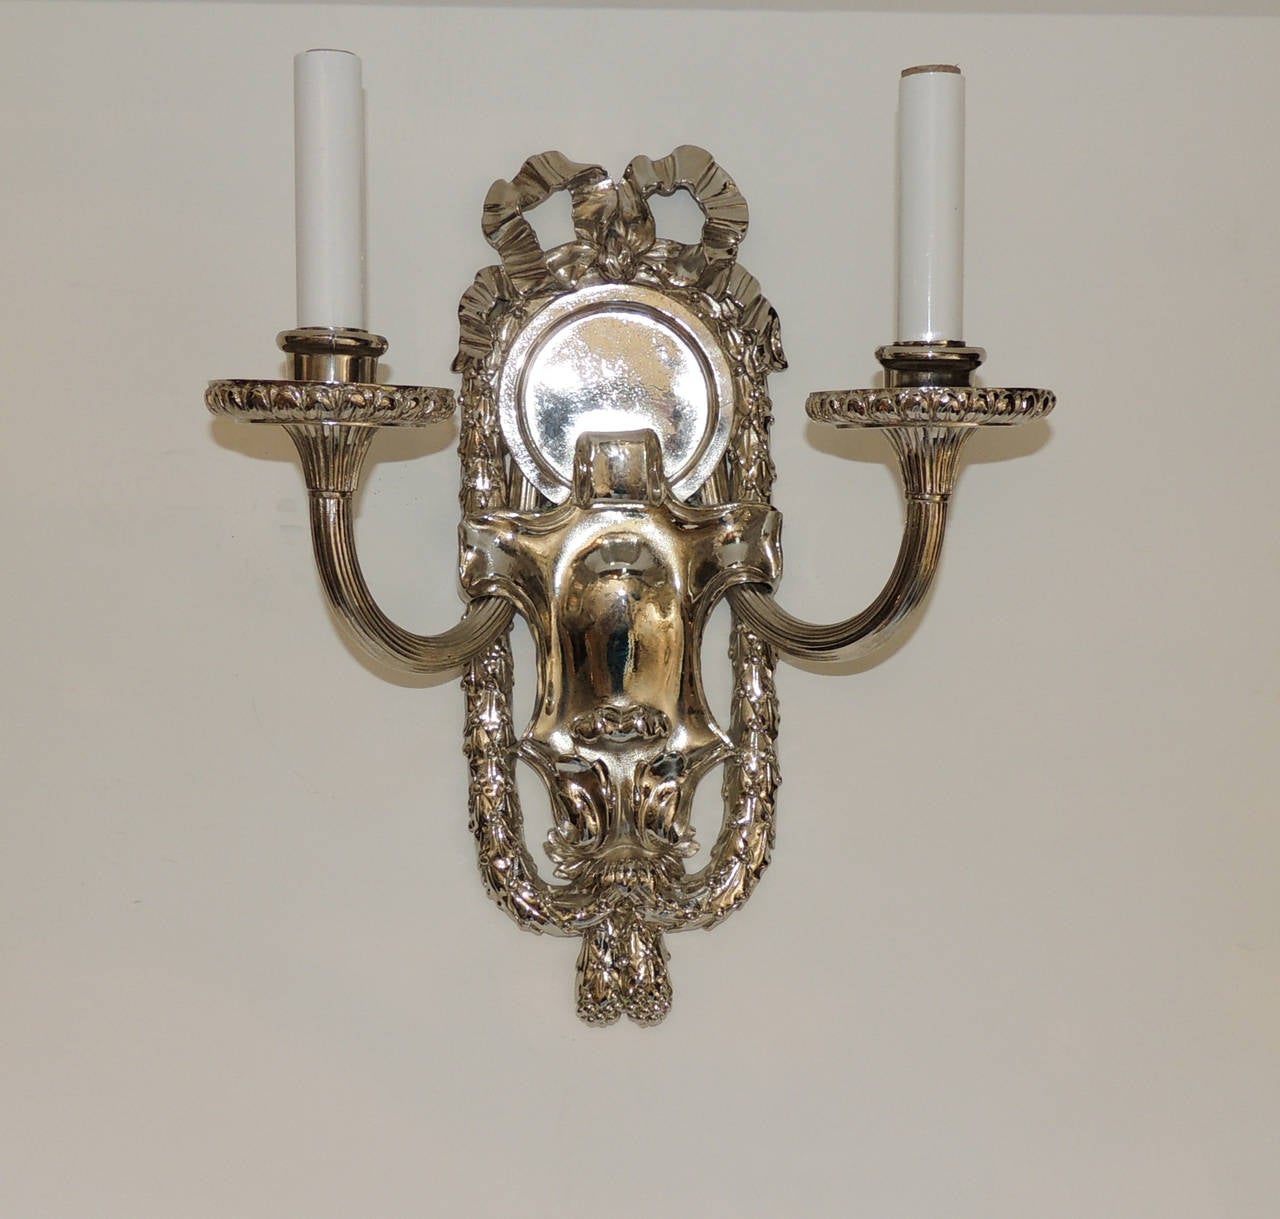 An incredible pair of marked Caldwell sconces with embellished bow top and framed with filigree draping. Set off with a wonderful polished center, the two fluted arms and fluted bobeches are the beautiful finish for these polished nickel